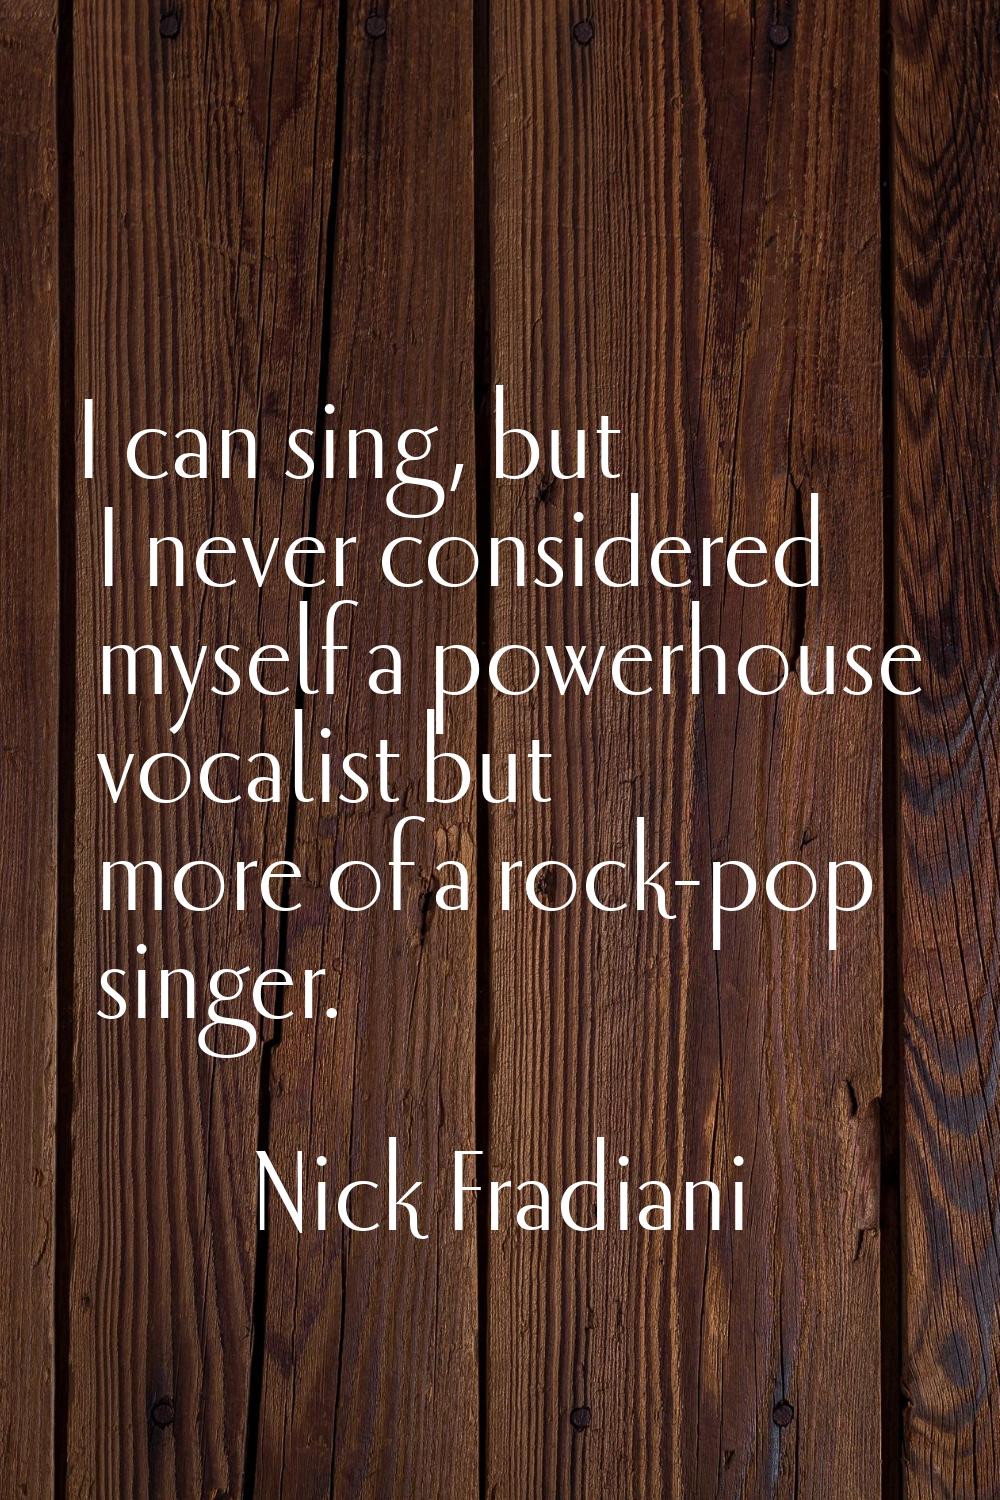 I can sing, but I never considered myself a powerhouse vocalist but more of a rock-pop singer.